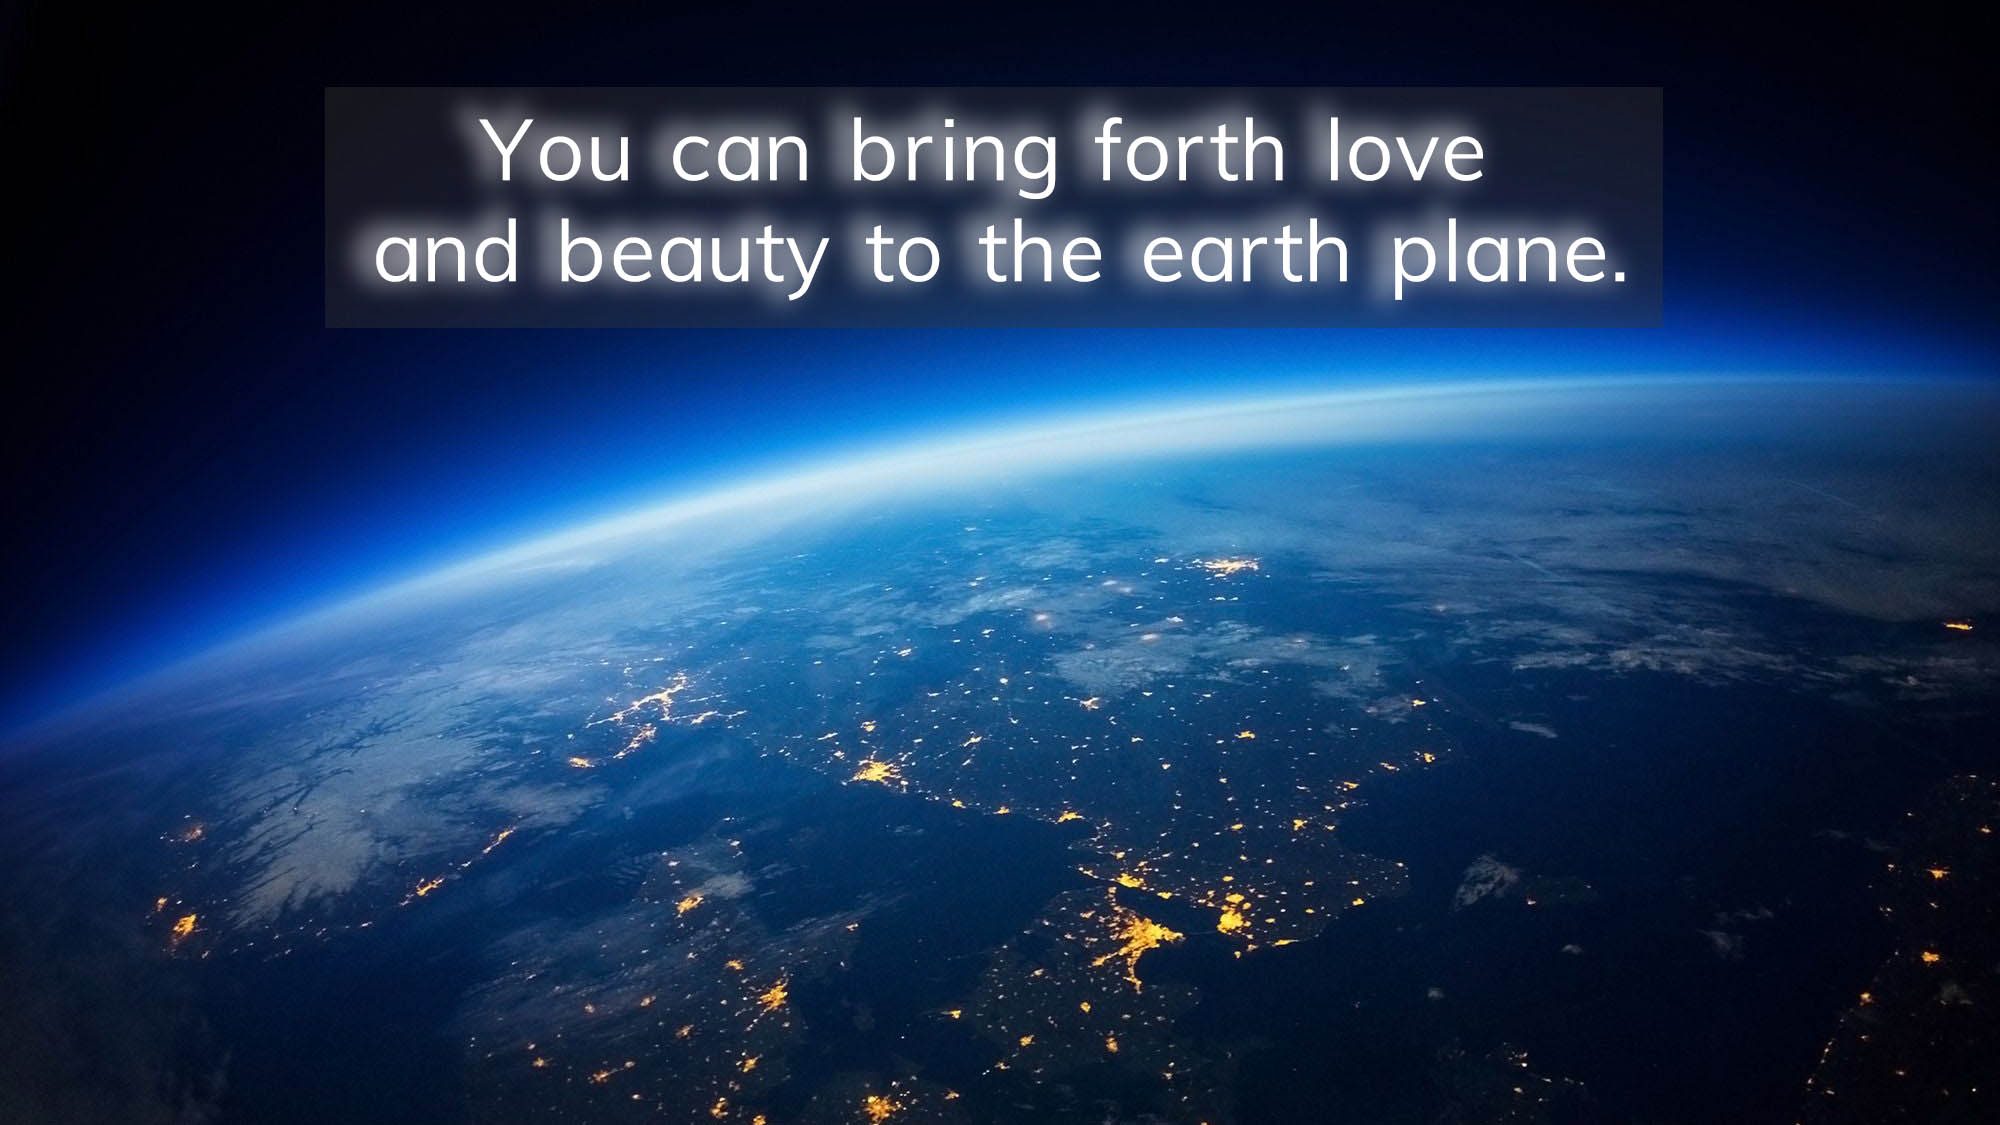 You can bring forth love and beauty to the earth plane.